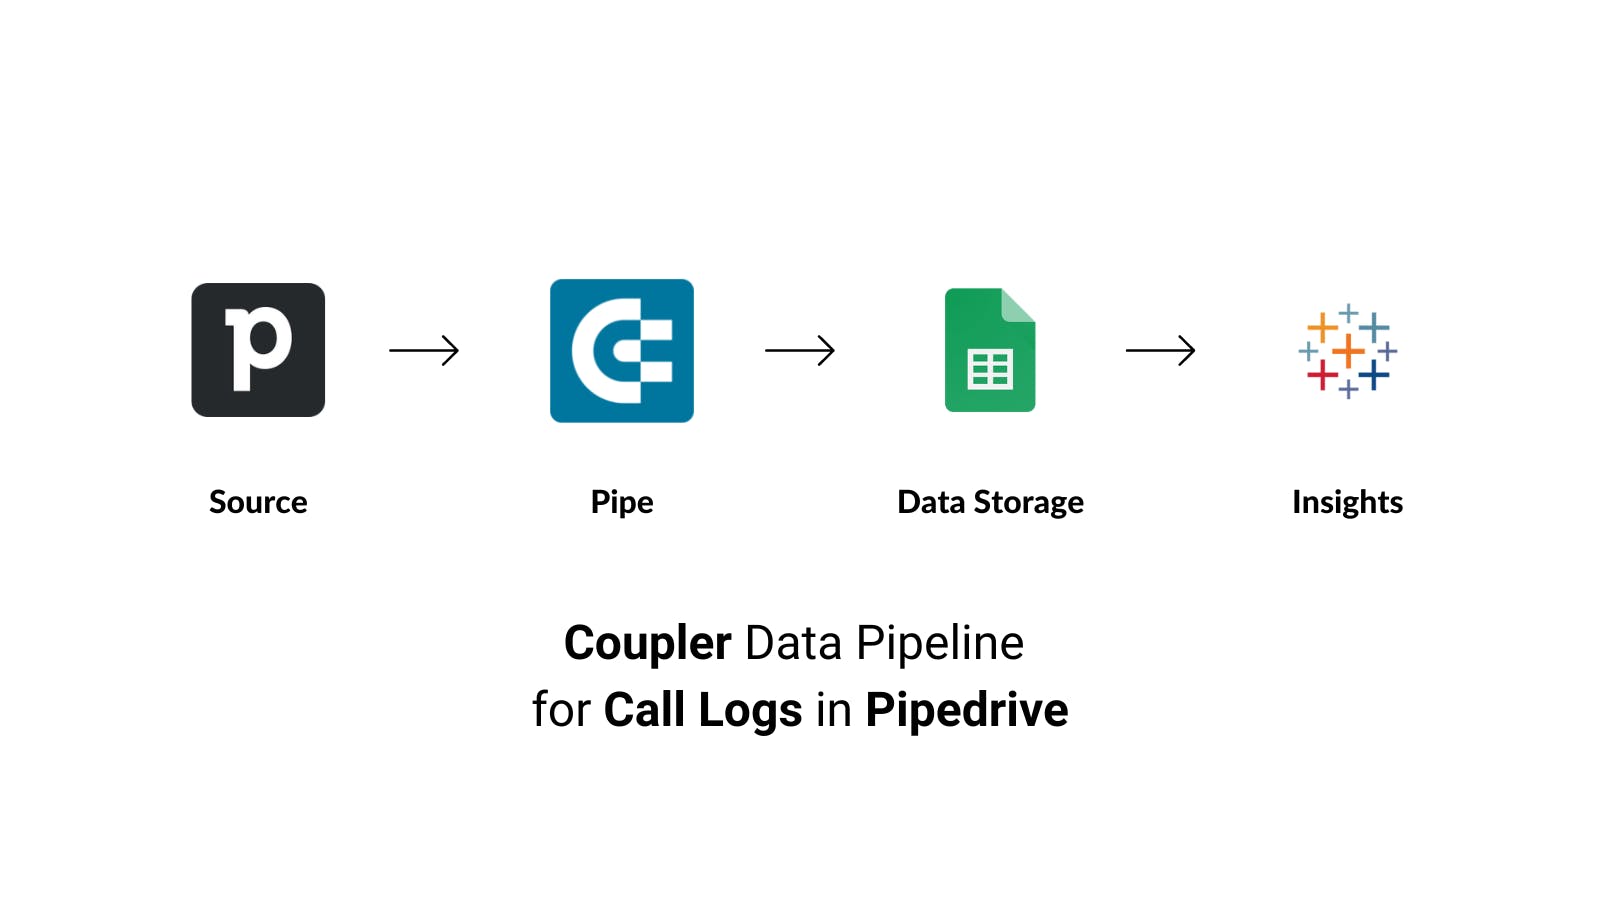 Coupler Data Pipeline for Call Logs in Pipedrive